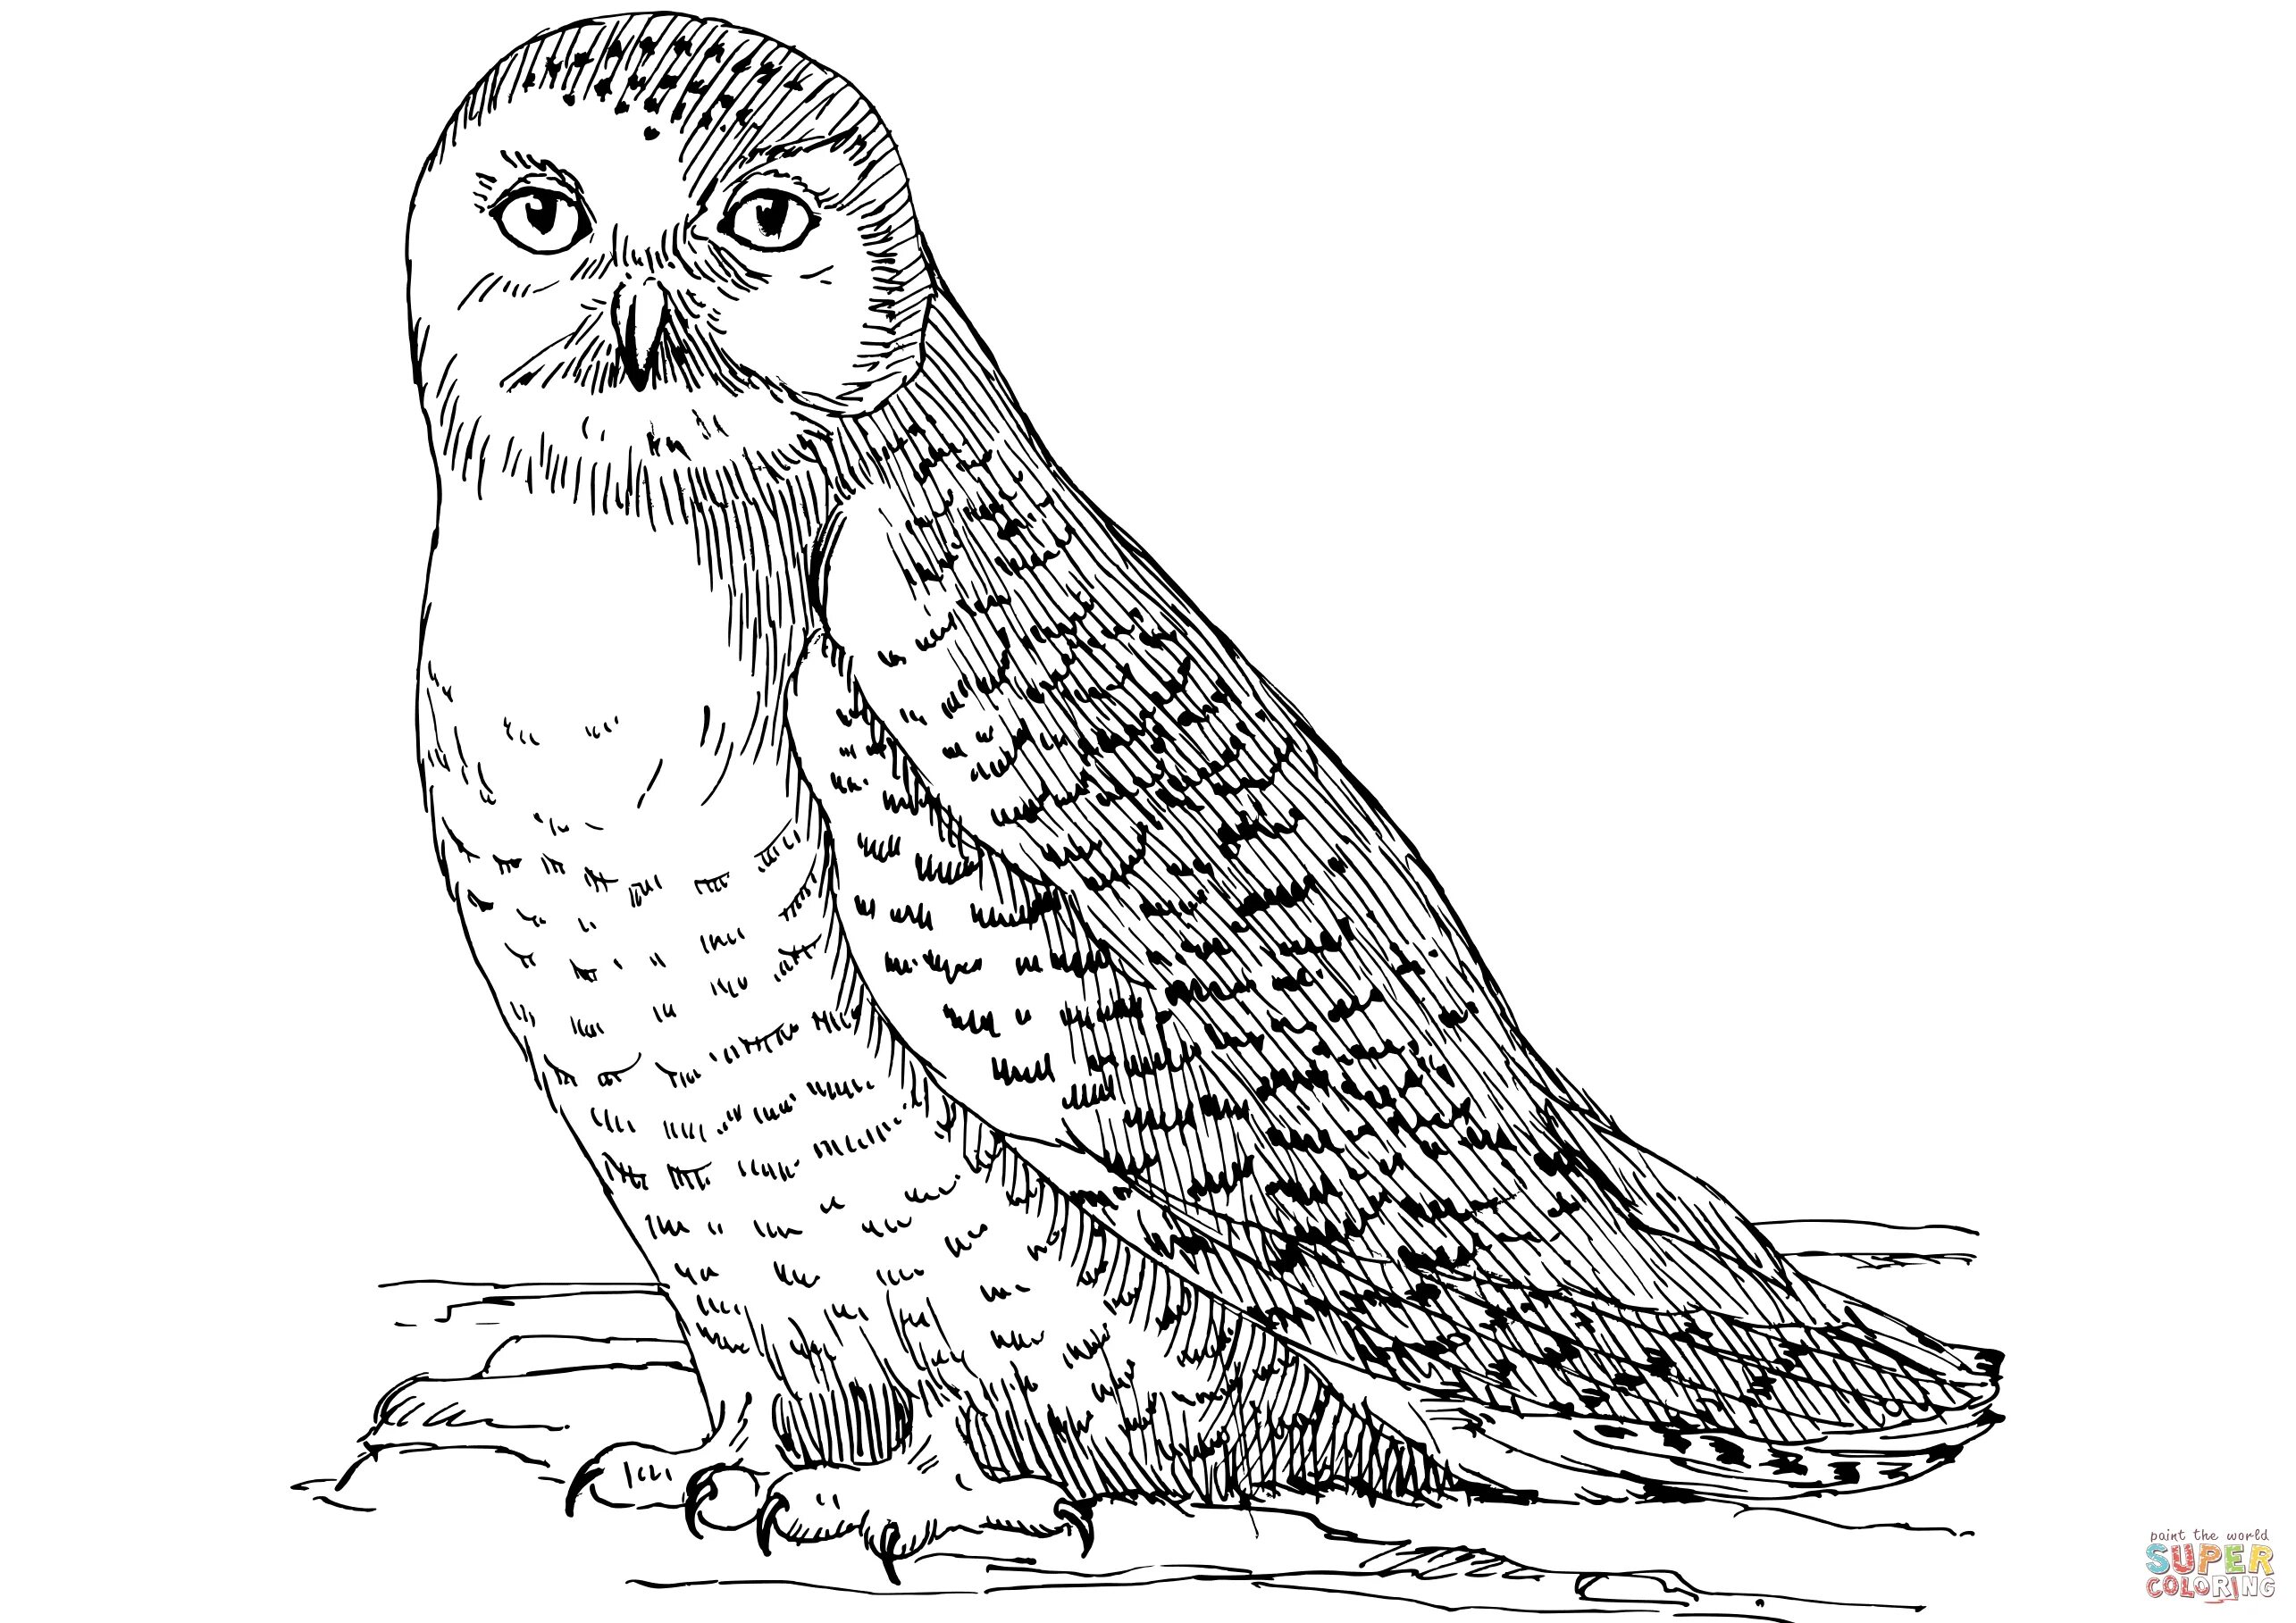 Snowy Owl fun coloring book for teens